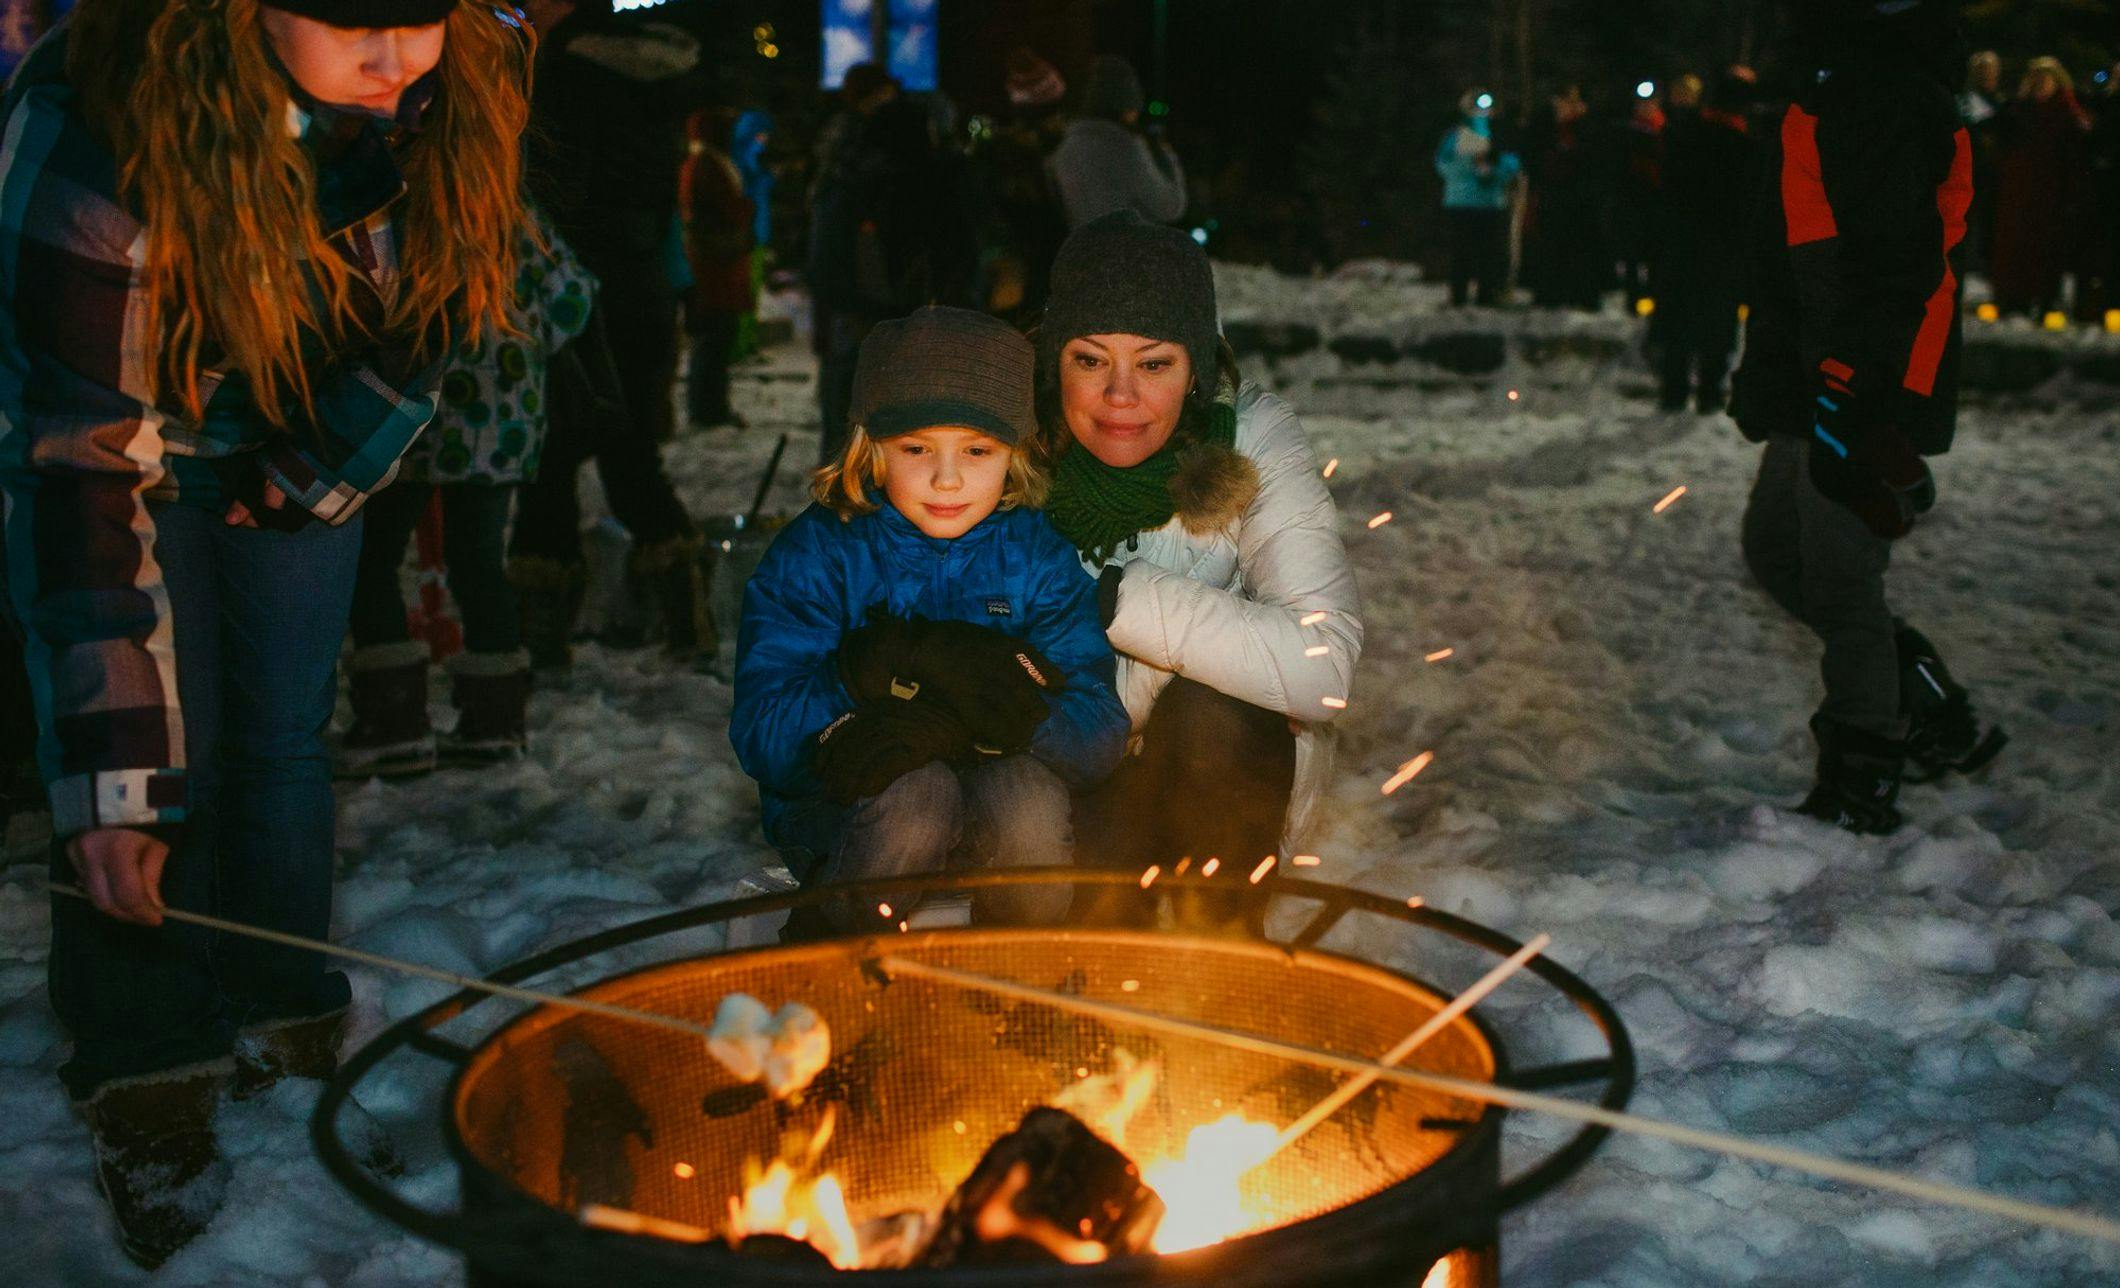 A mom and son sit in front of an outdoor fire pit roasting marshmallows with Christmas lights and snow in the background